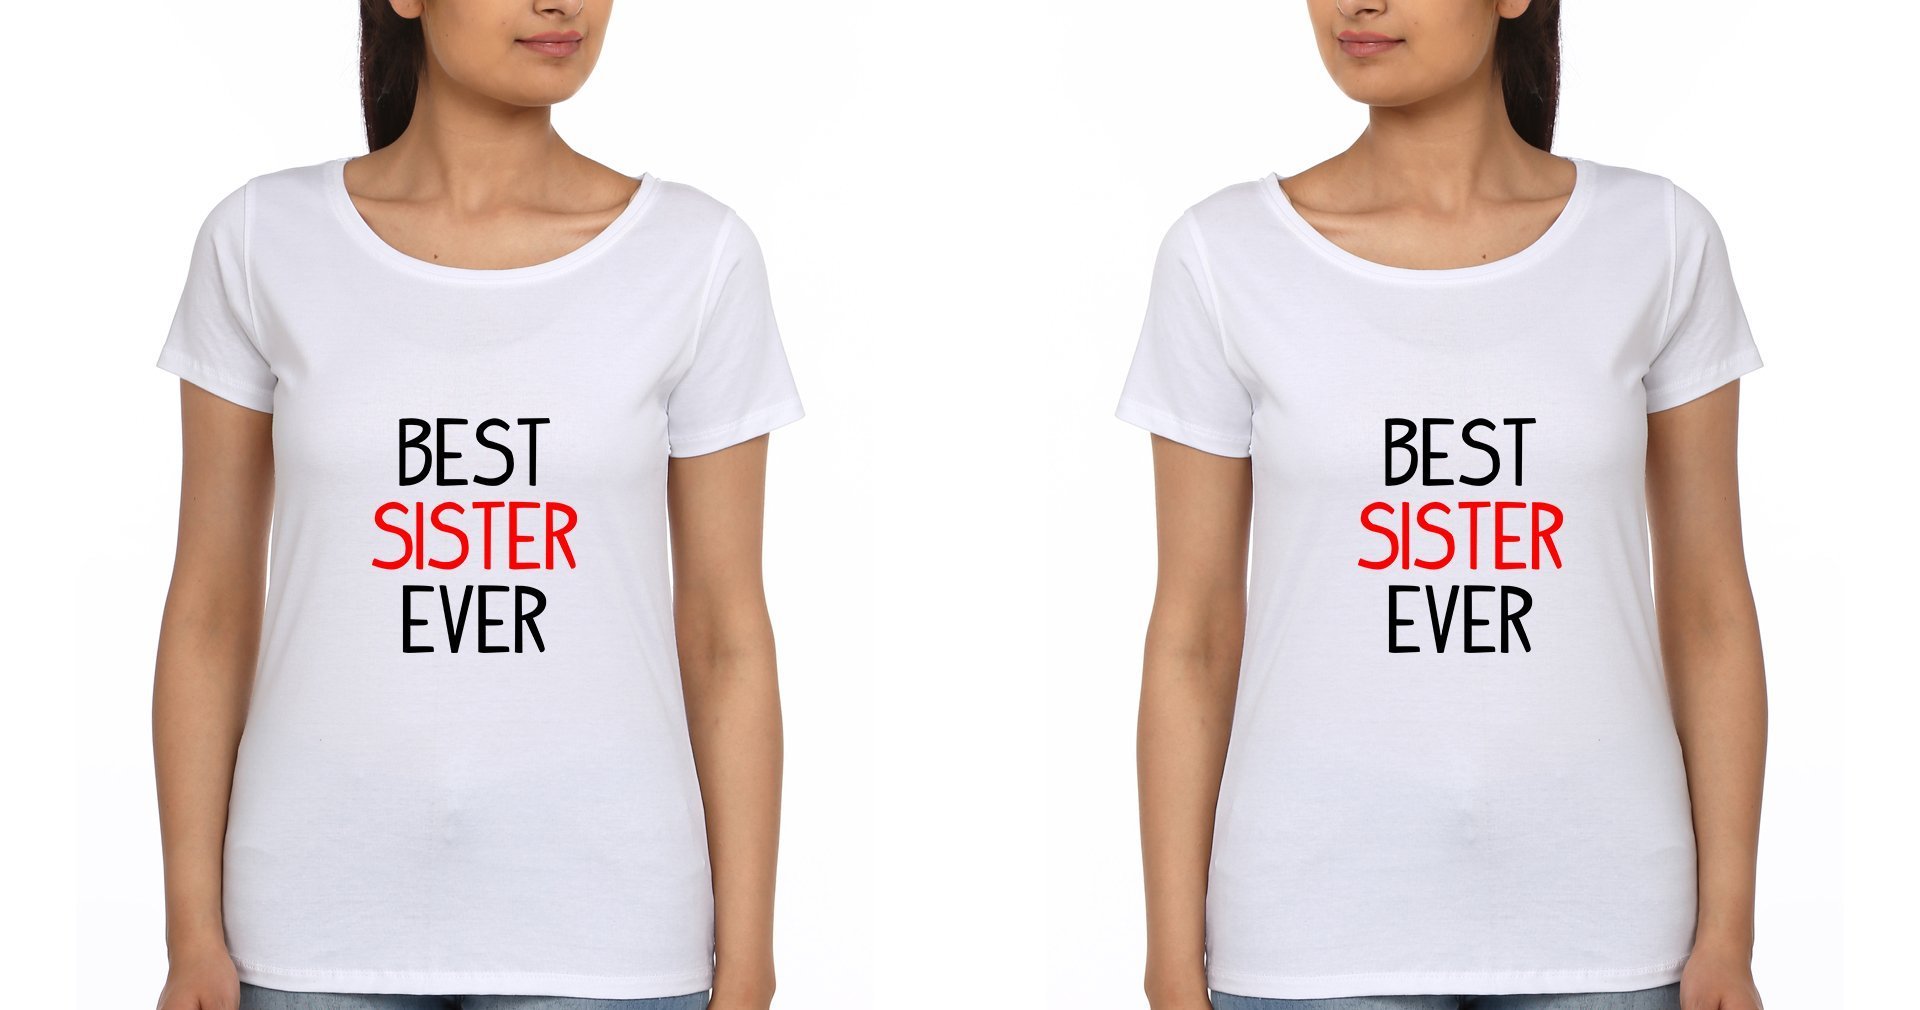 Best Sister Sister Half Sleeves T-Shirts -FunkyTradition - FunkyTradition